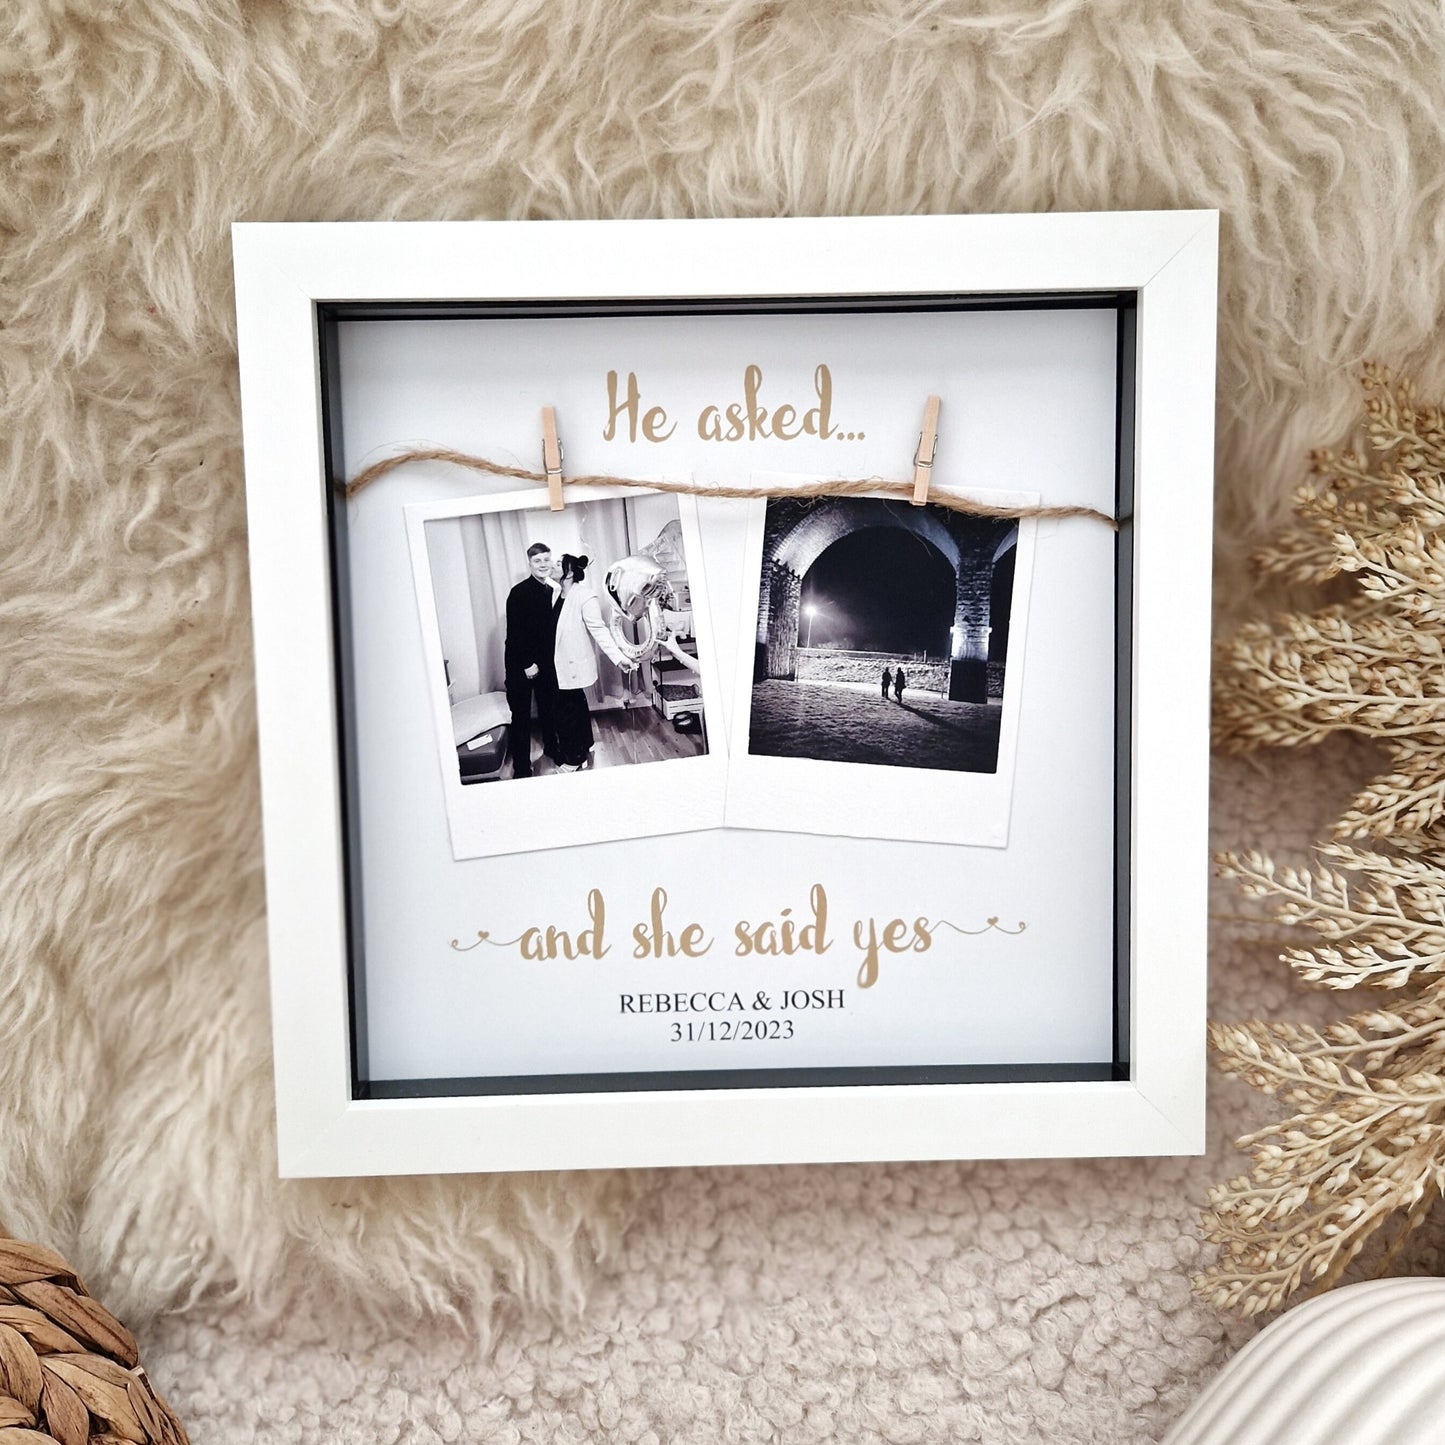 Personalised Engagement Photo frame gifts